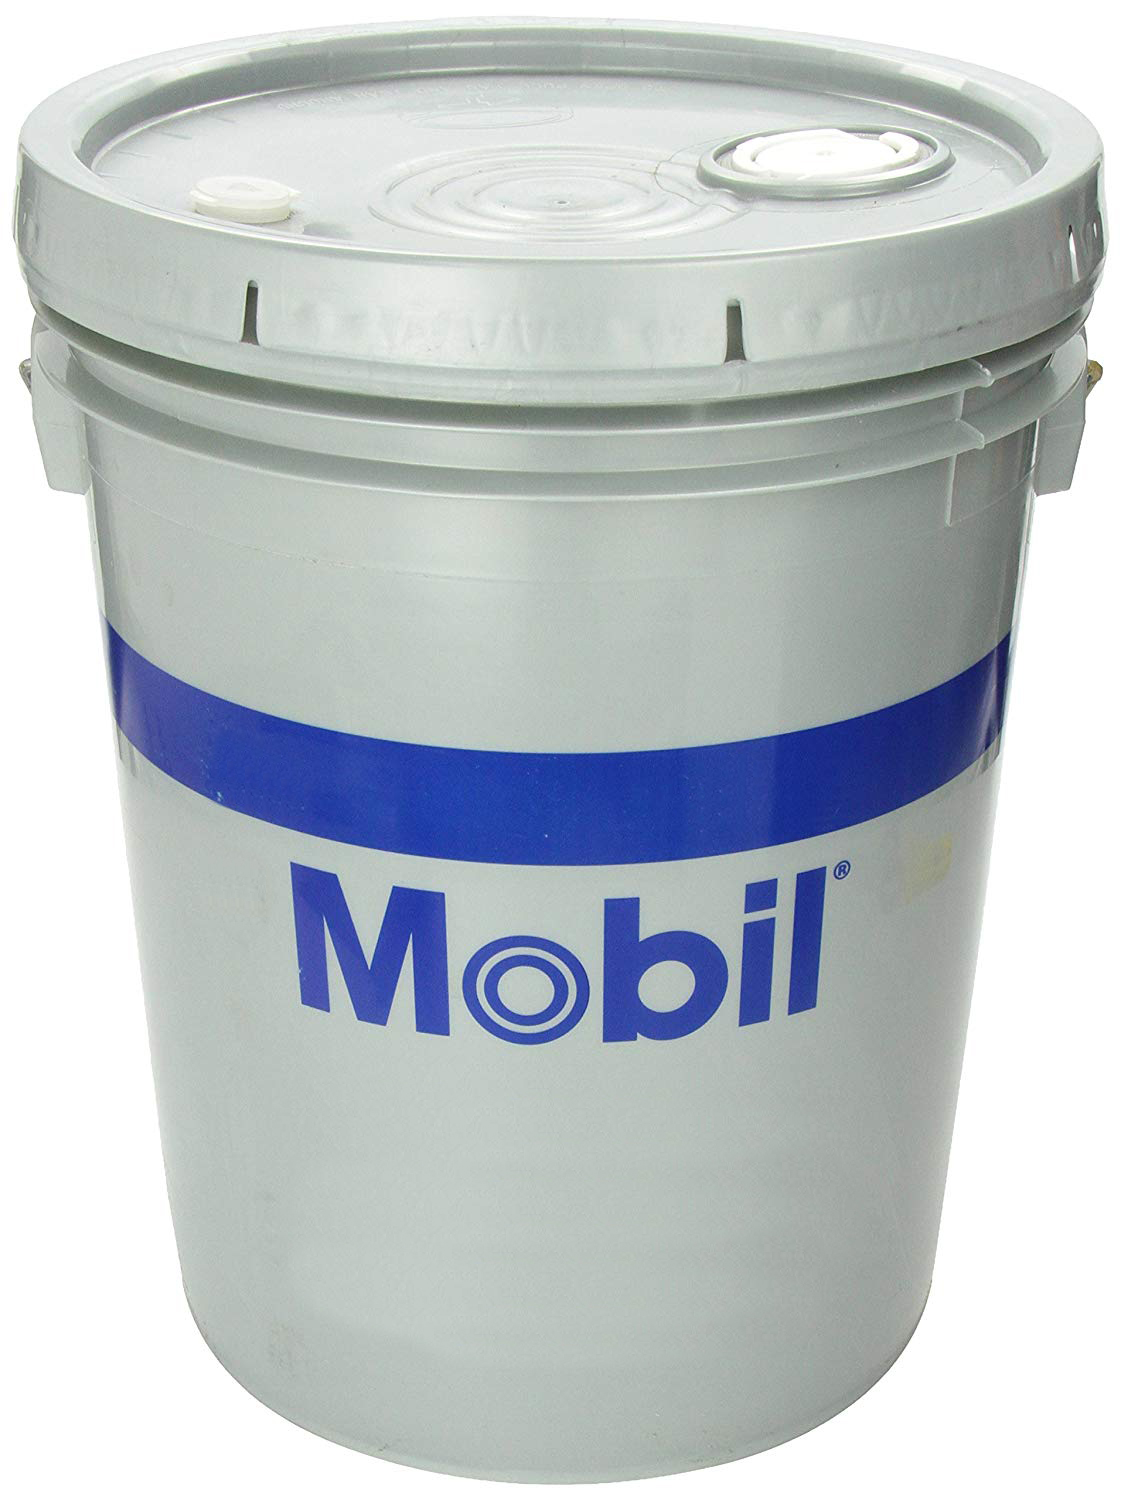 MOBILUX EP-2 (LITHIUM GREASE) - 35.2# Pail